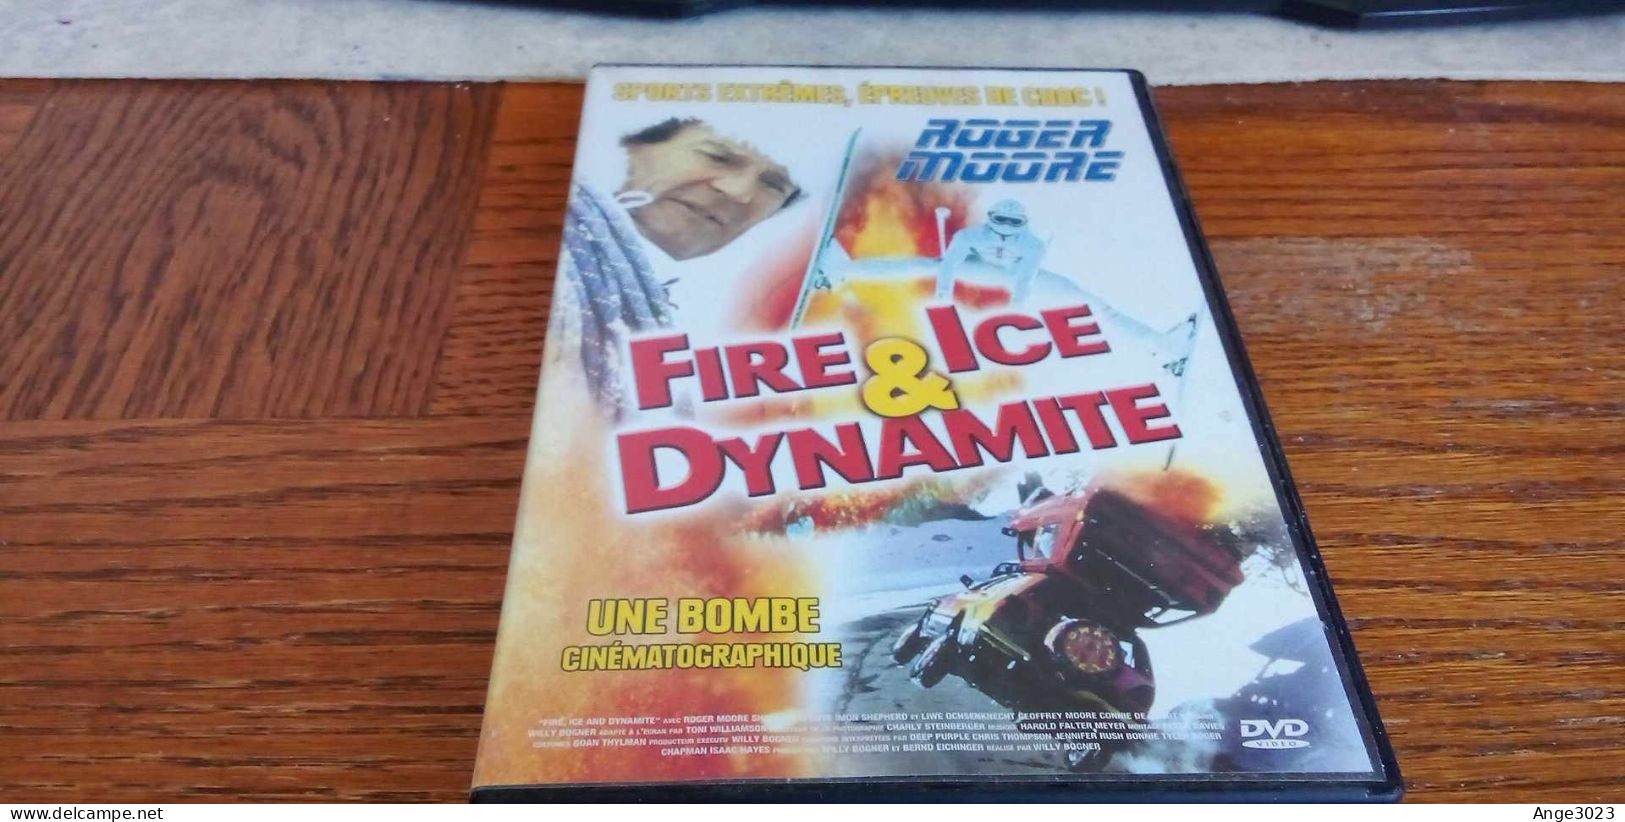 FIRE ICE & DYNAMITE - Action, Adventure